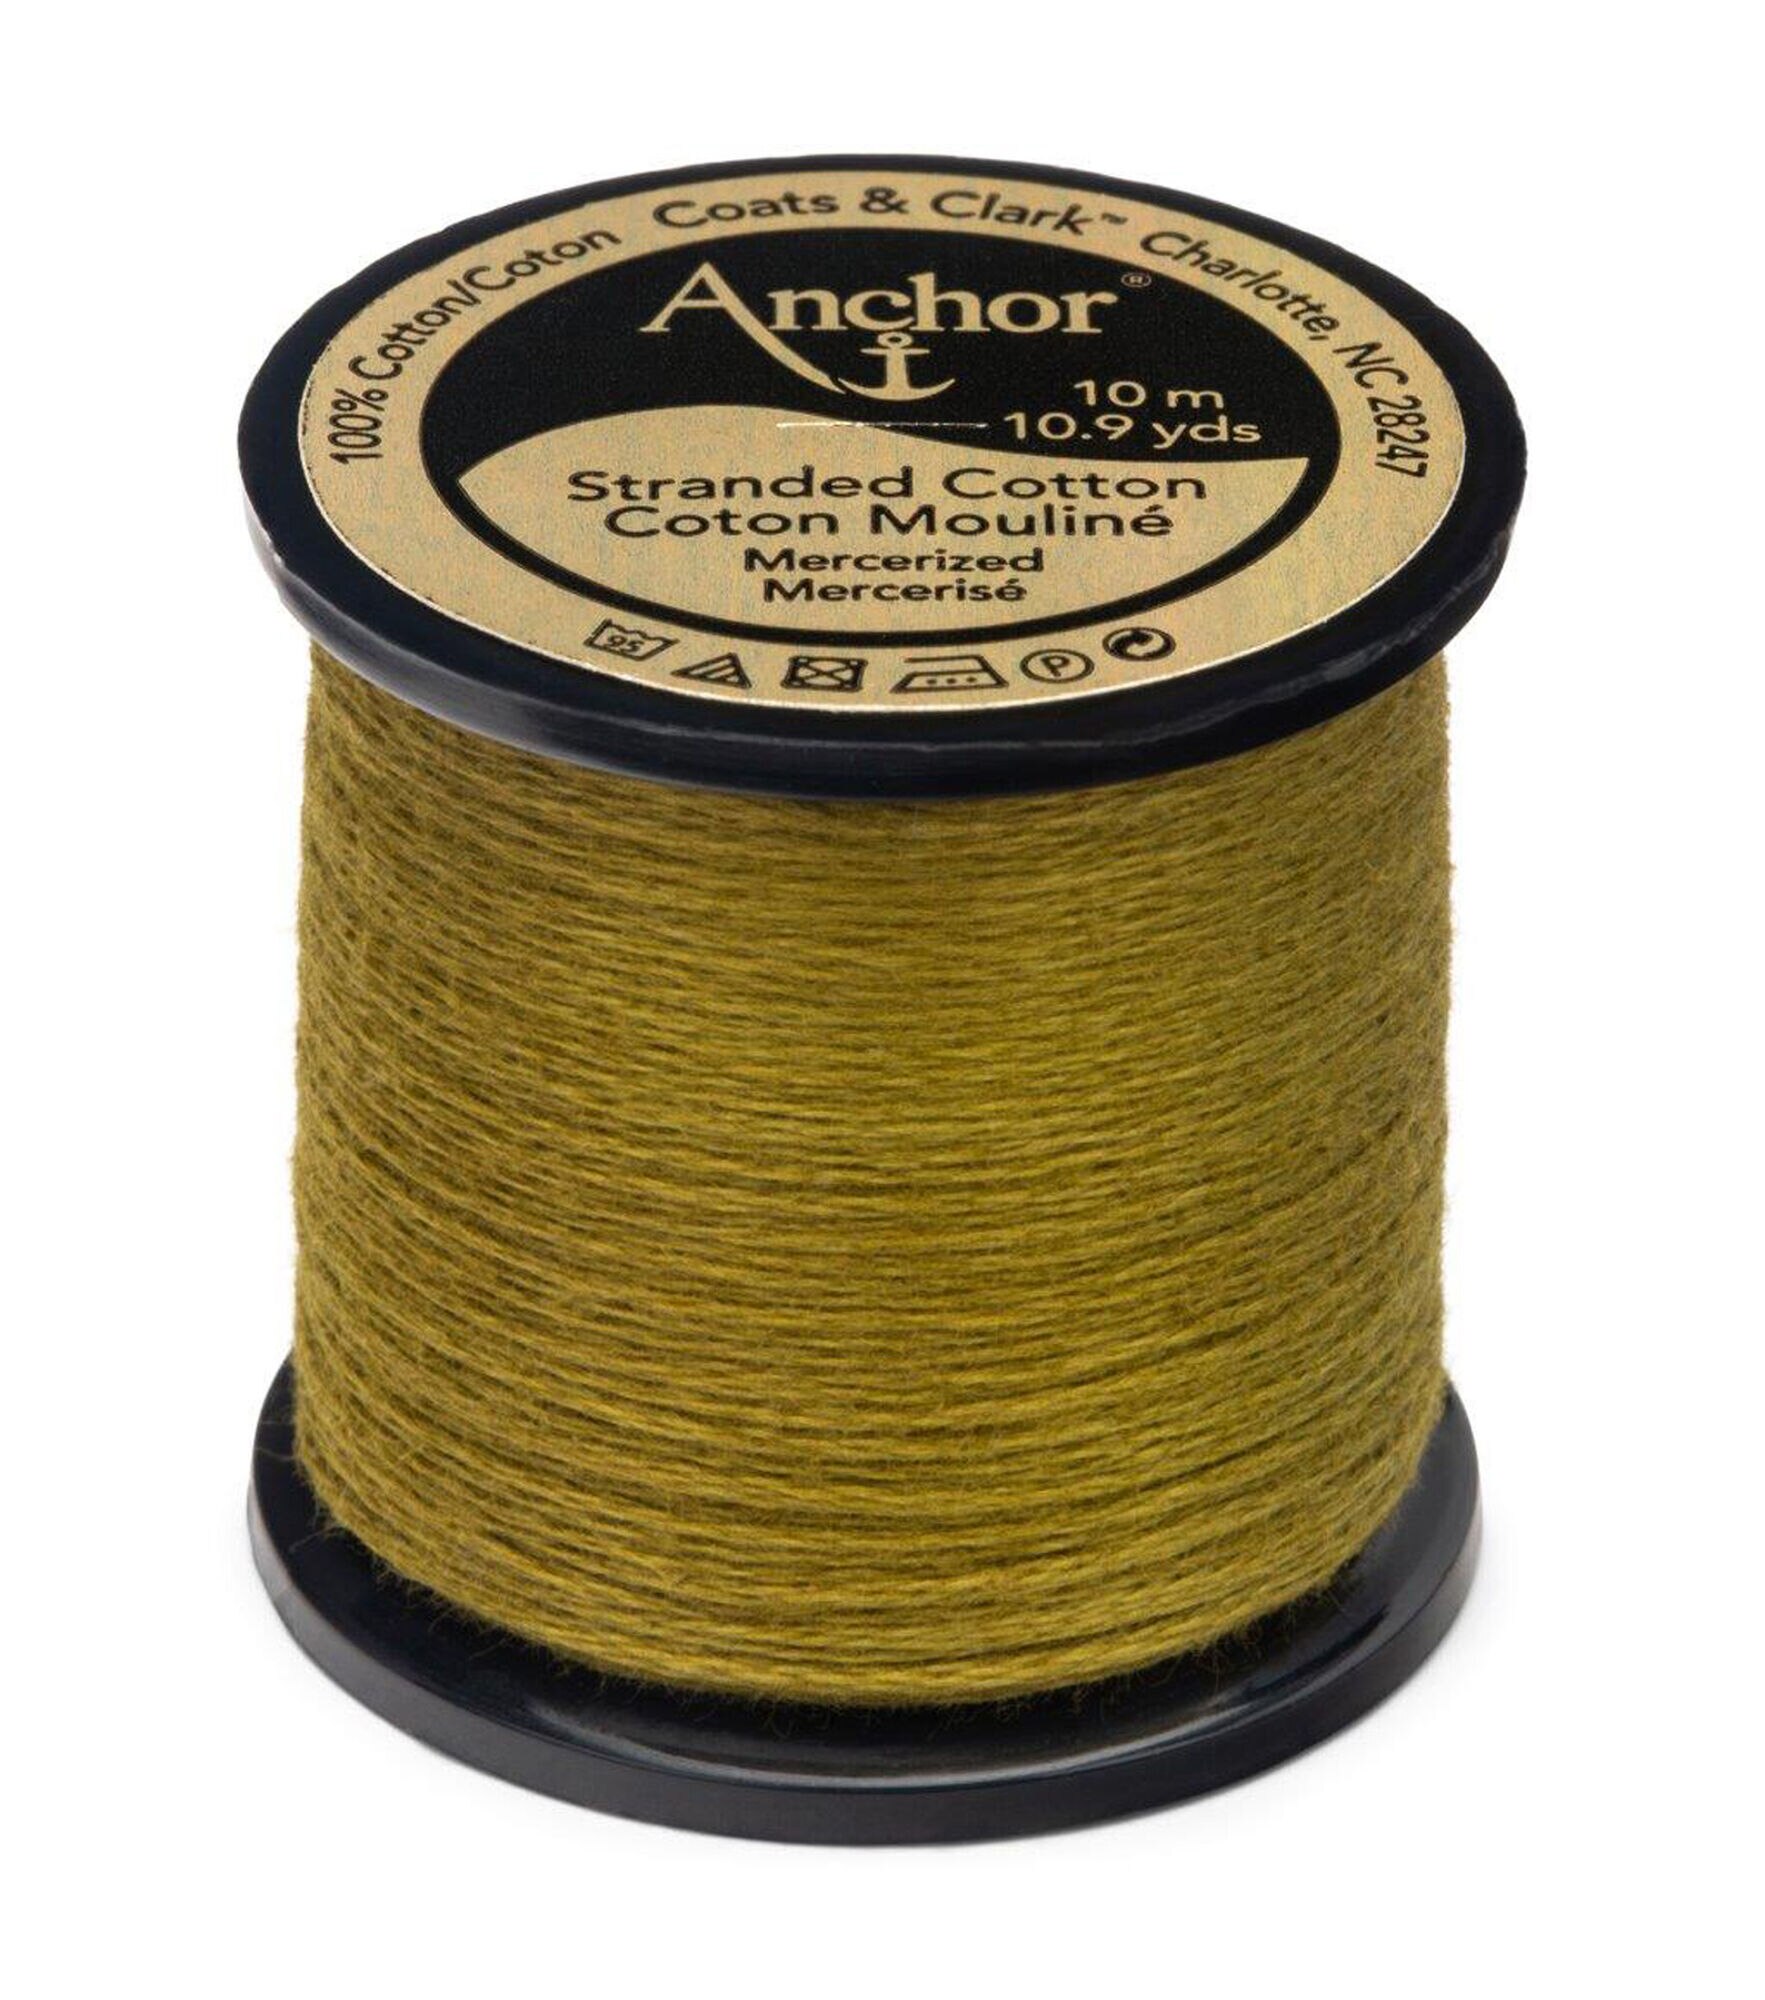 Anchor Cotton 10.9yd Greens Cotton Embroidery Floss, 281 Olive Green Dark, hi-res